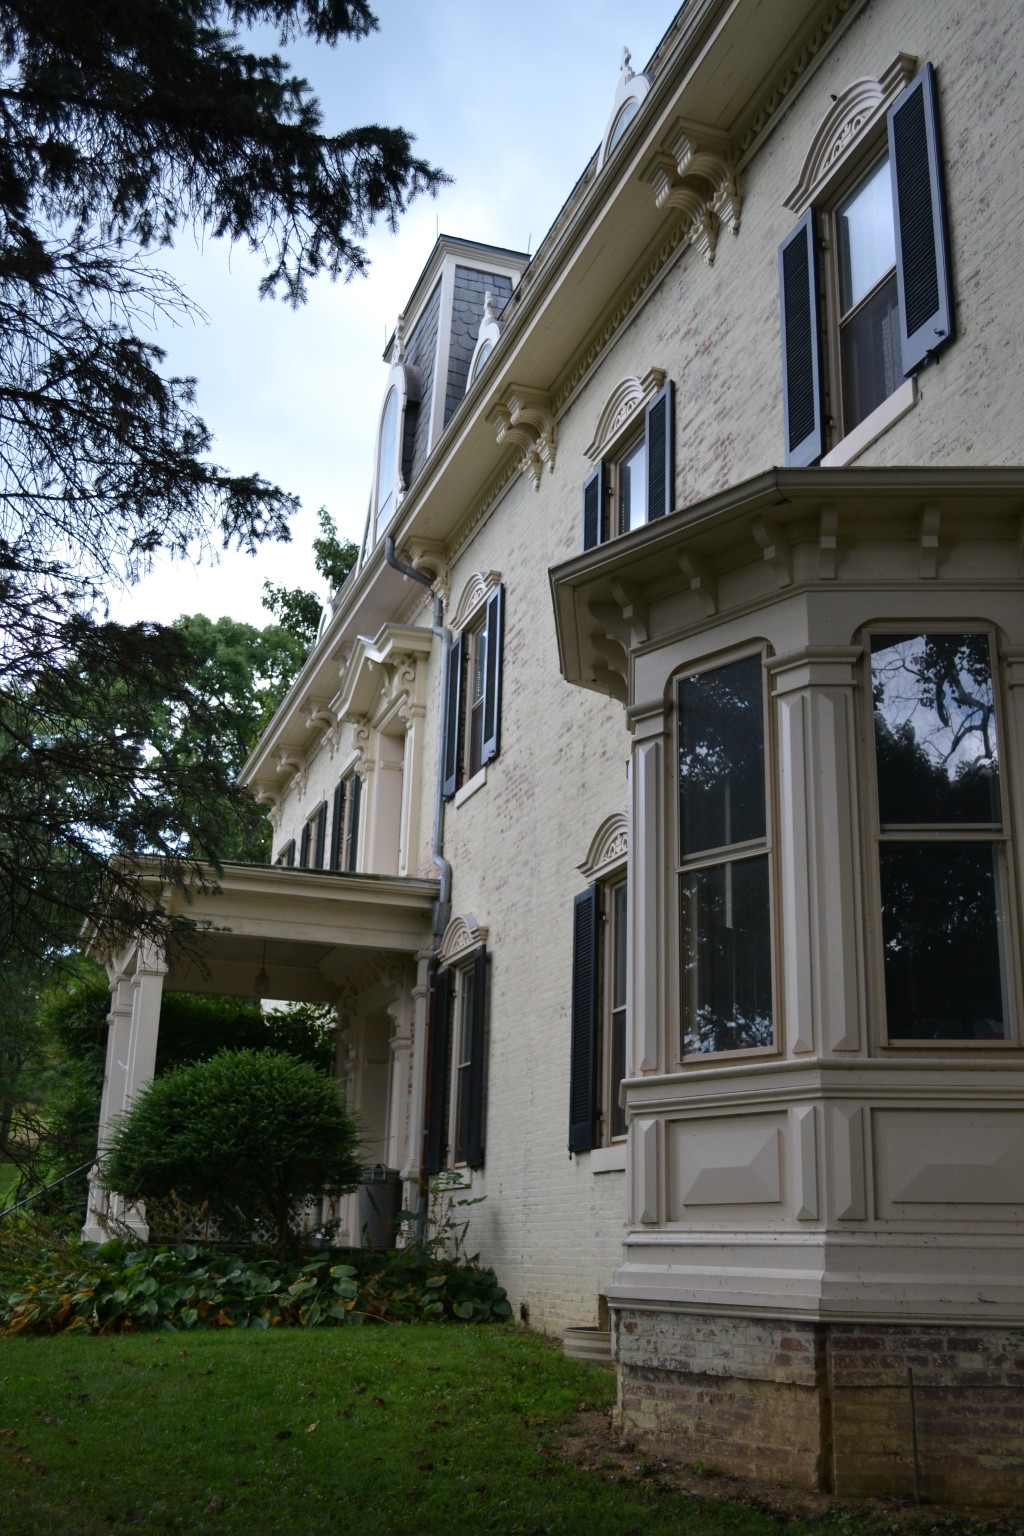 Side view of the house.